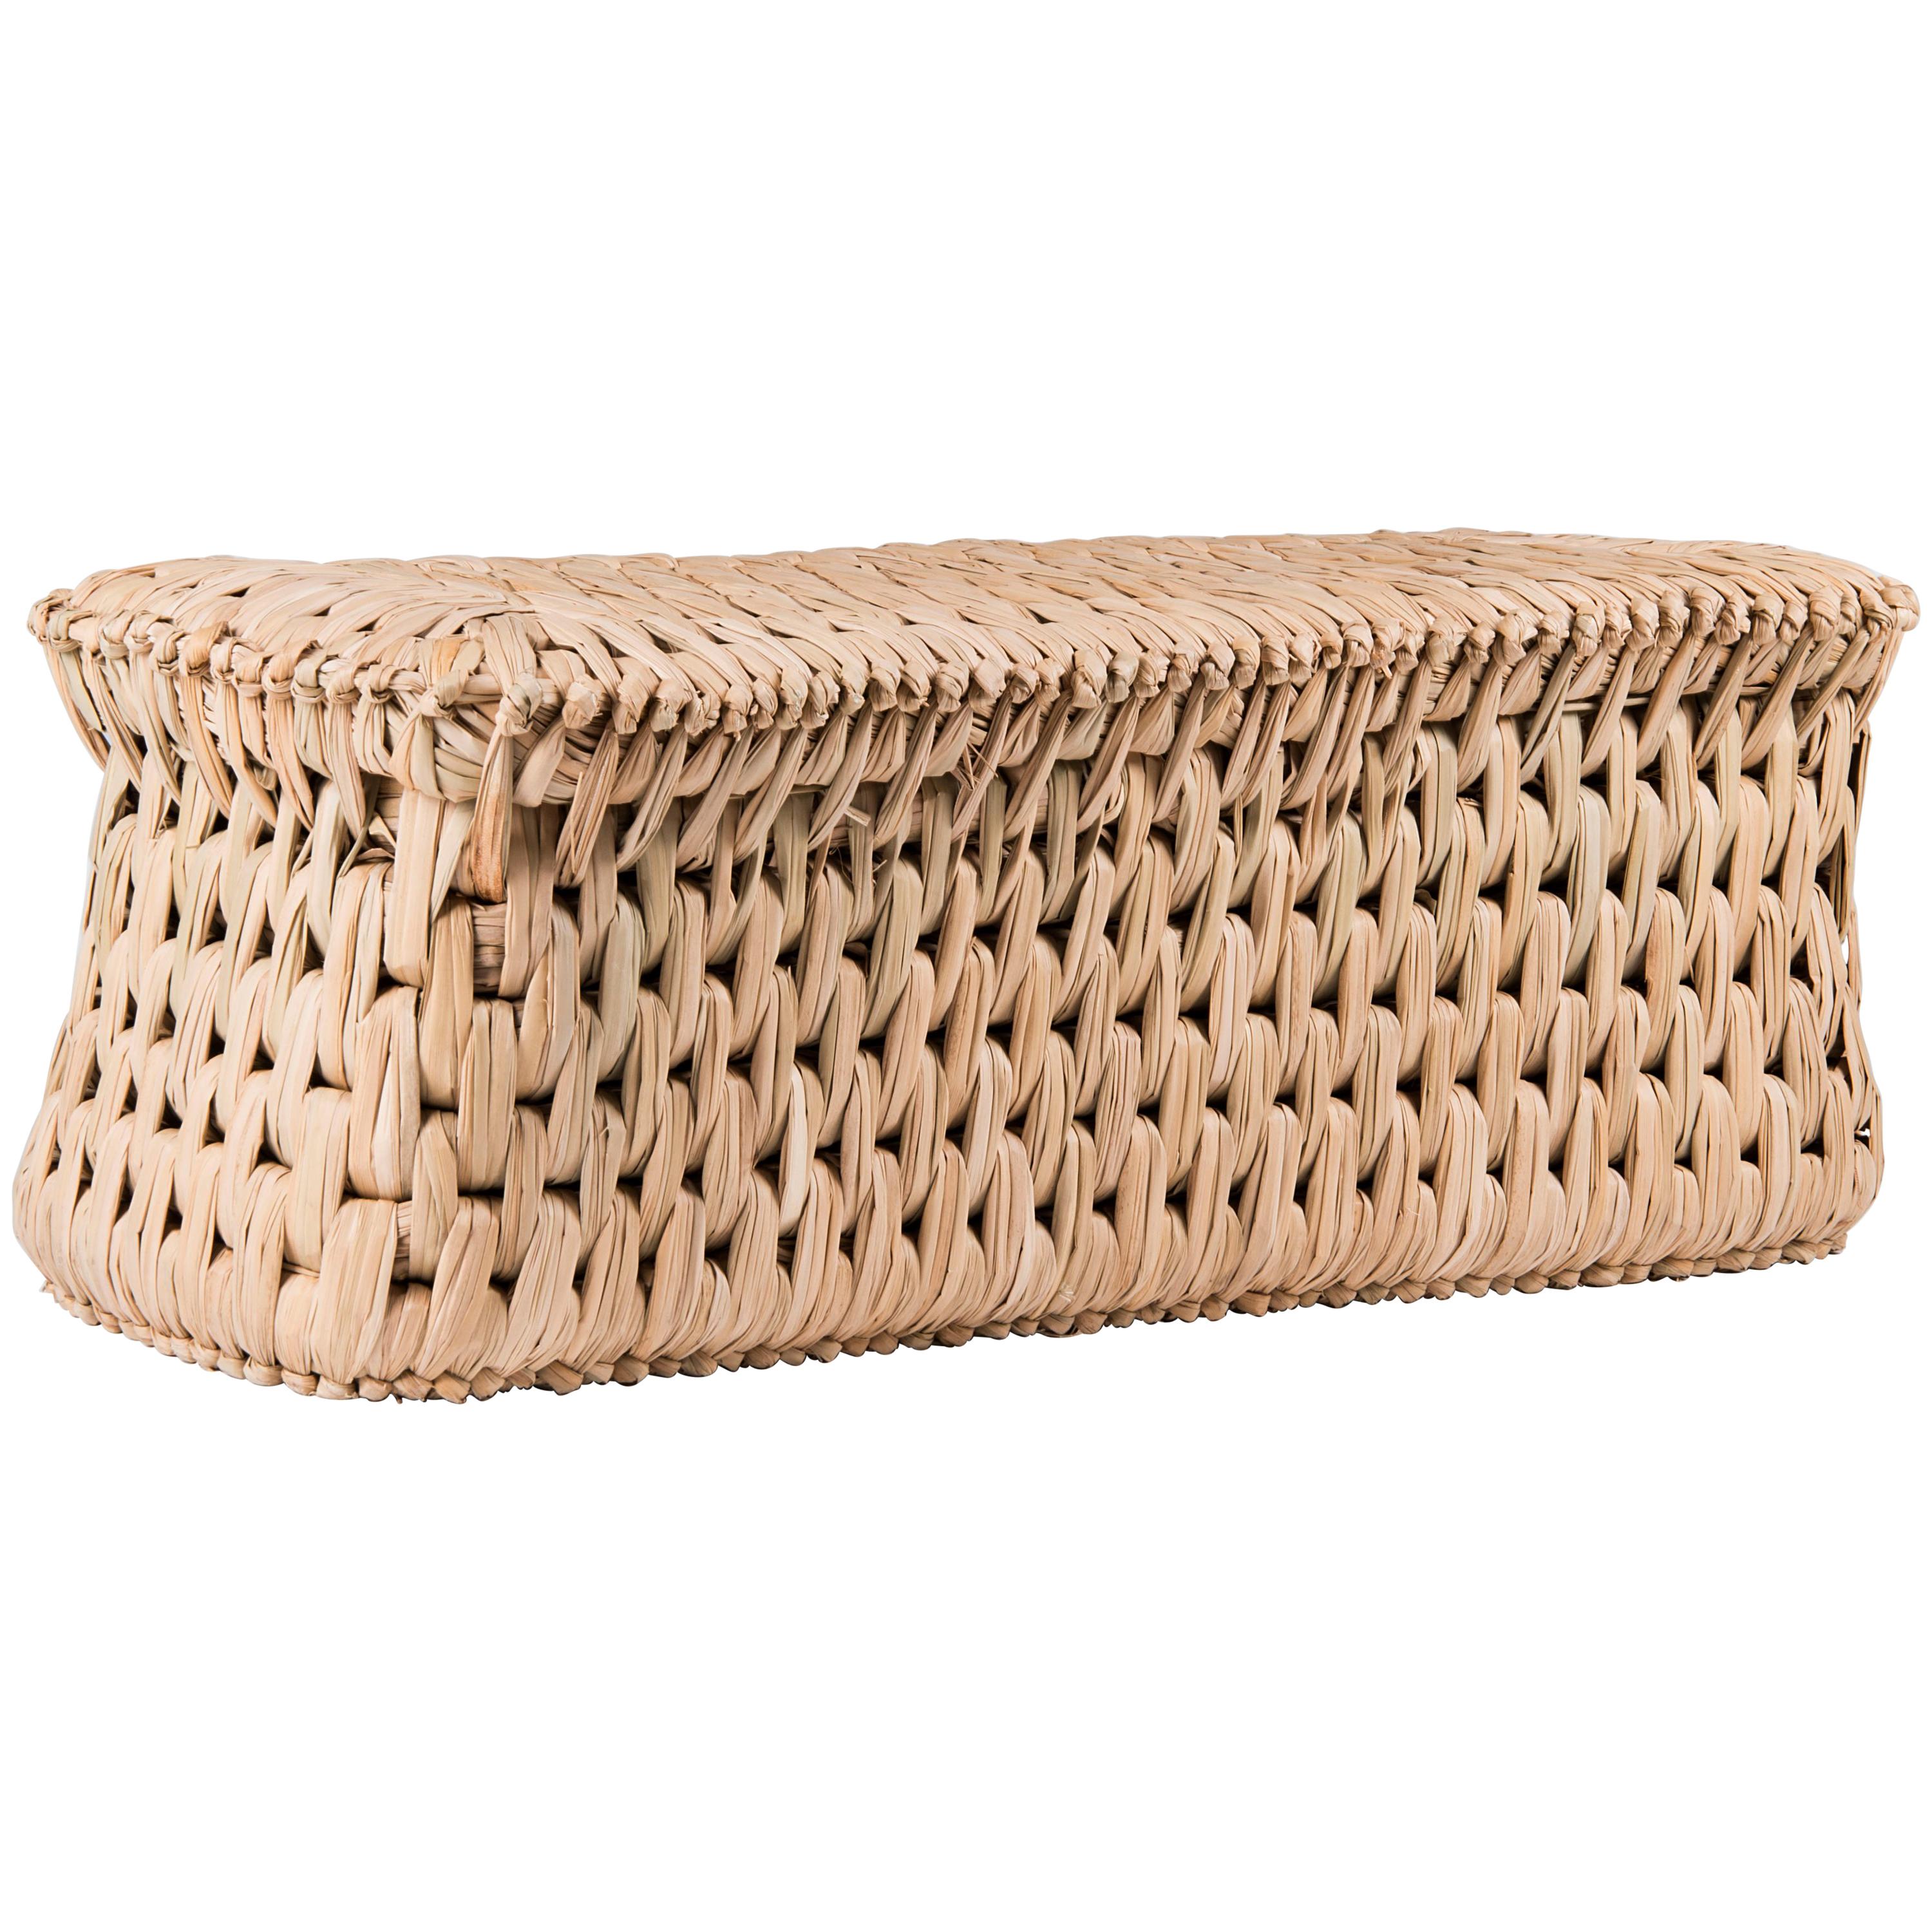 Txt.05 Handcrafted Palm Woven Tule Bench made in Mexico by Txt-ure for Luteca